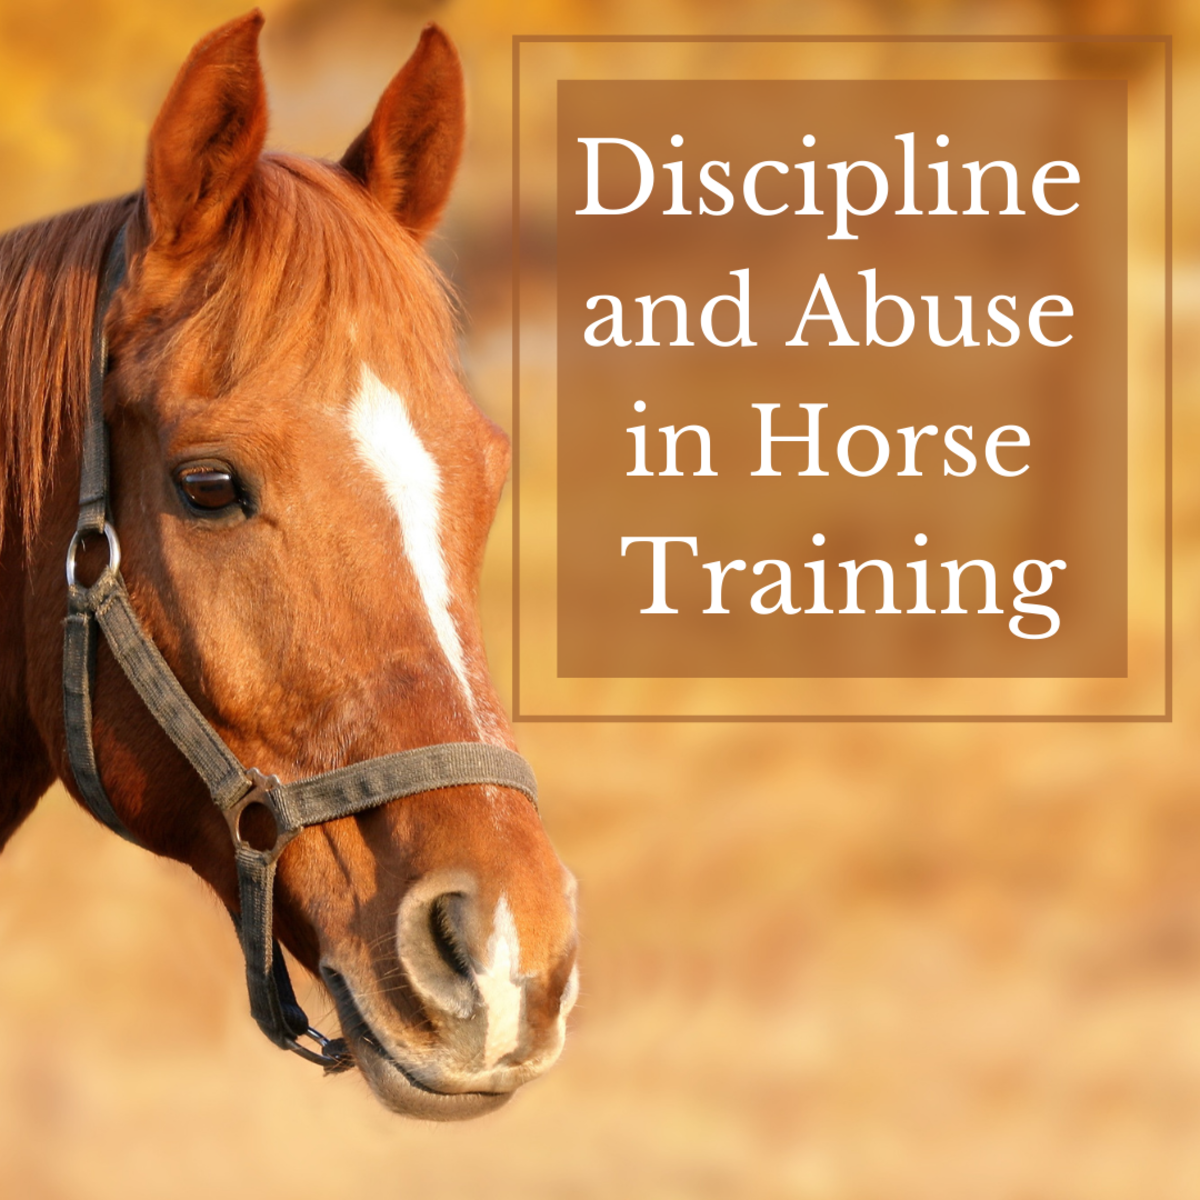 When does discipline become abuse?